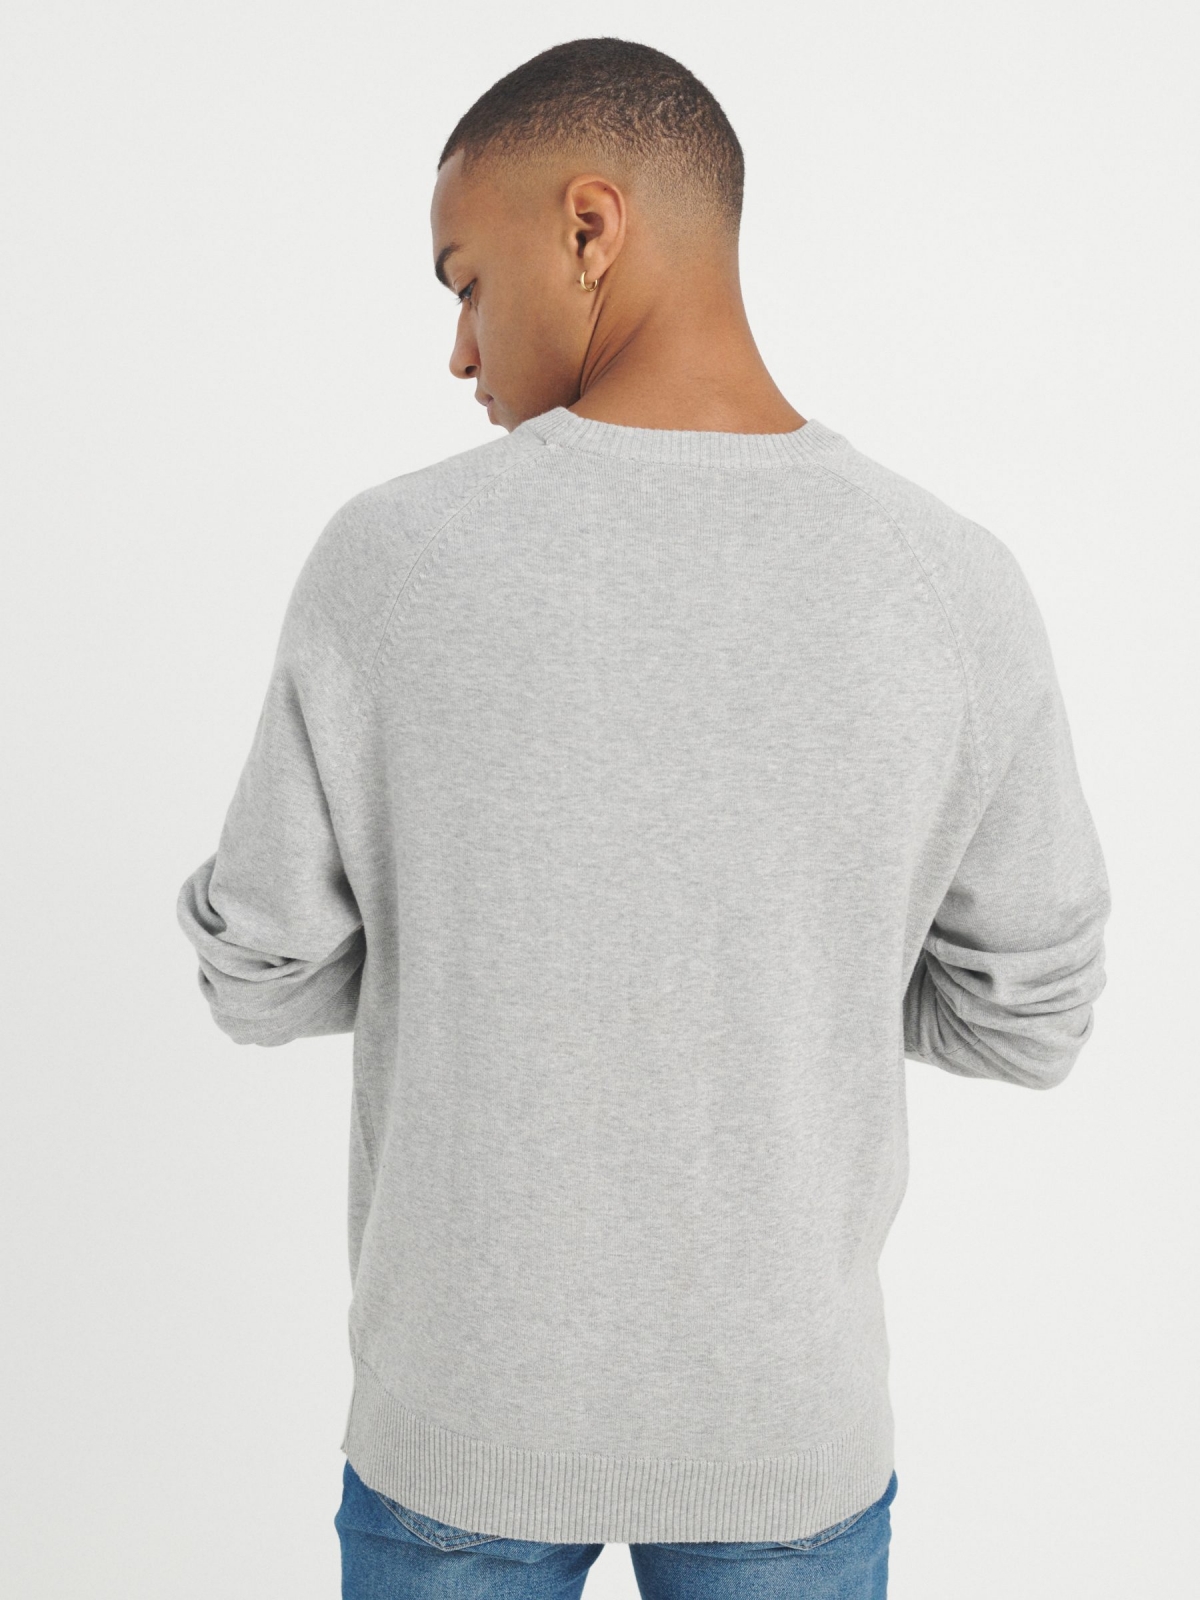 Plain sweater round neck light grey middle back view